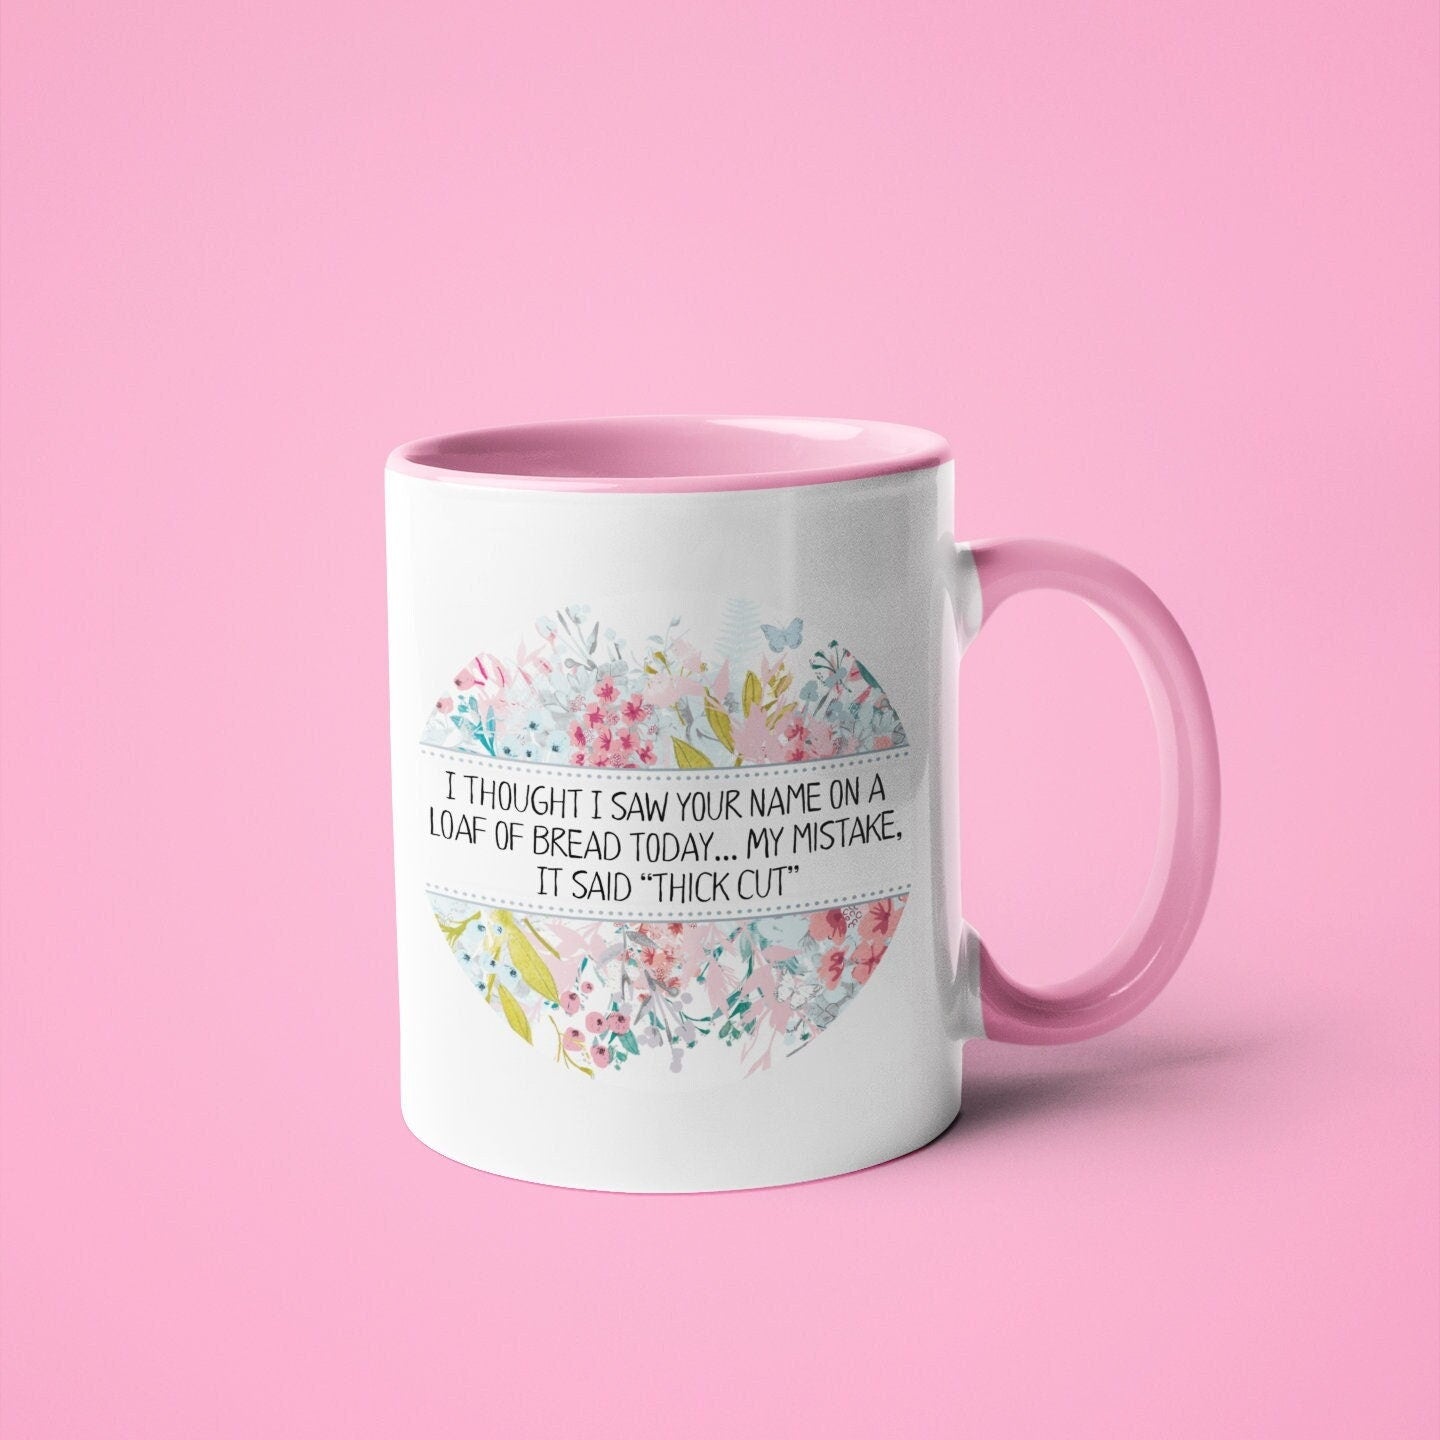 A white ceramic mug with a pink handle & inner featuring the funny quote i thought i saw your name on a loaf of bread today My mistake, it said thick cut. Printed in black ink surrounded by a colourful floral design.